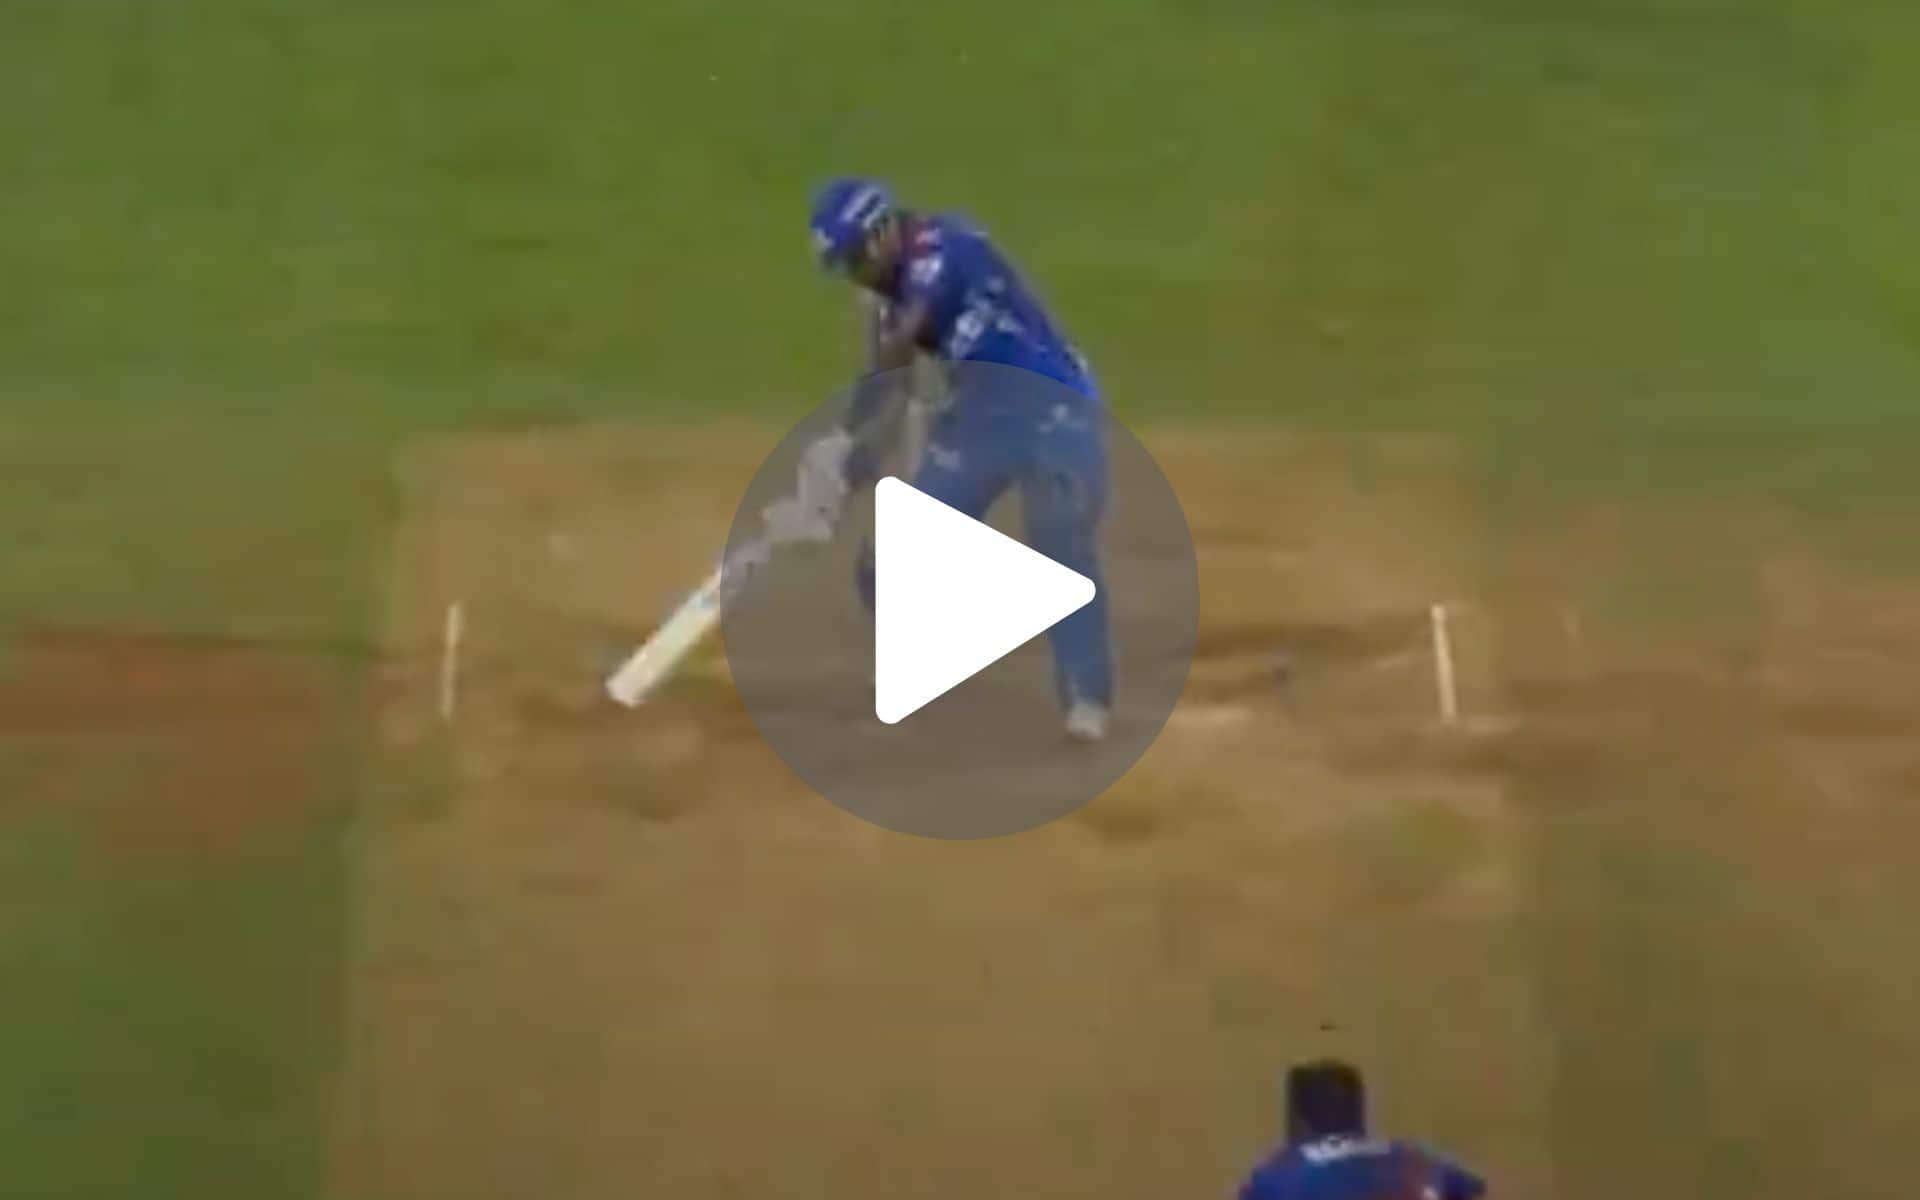 [Watch] Hardik Pandya Finishes In Style With A Trademark Six Against Helpless RCB